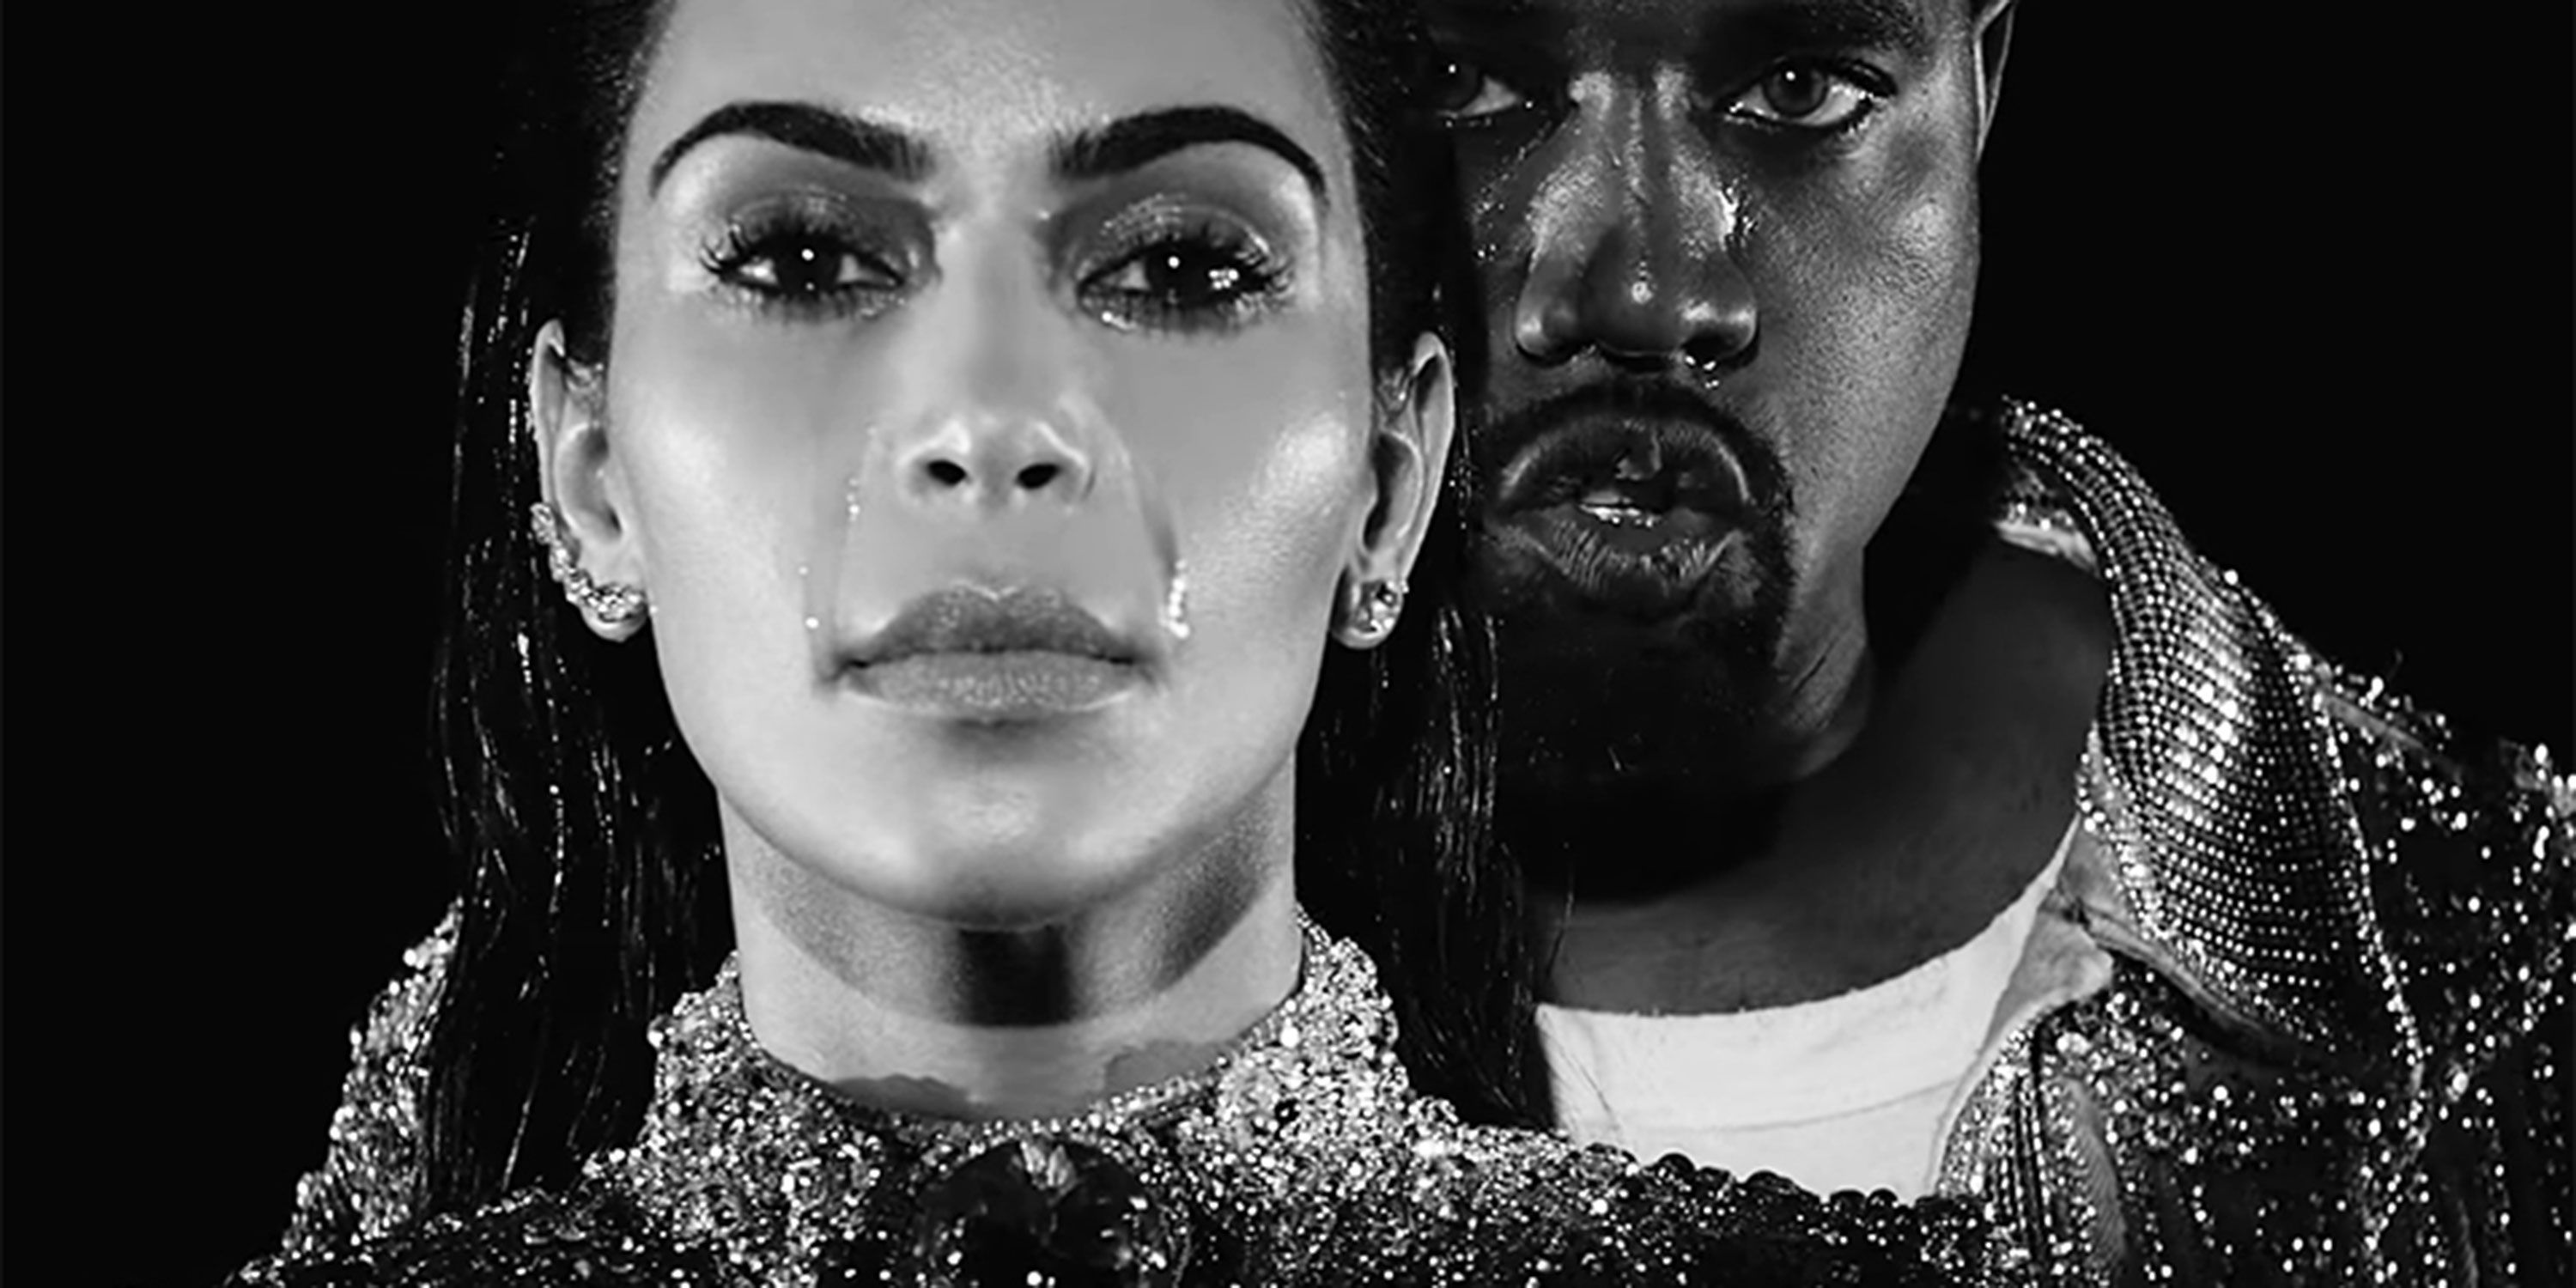 kryds Mutton Ambient Kanye West teams up with Balmain for 'Wolves' video